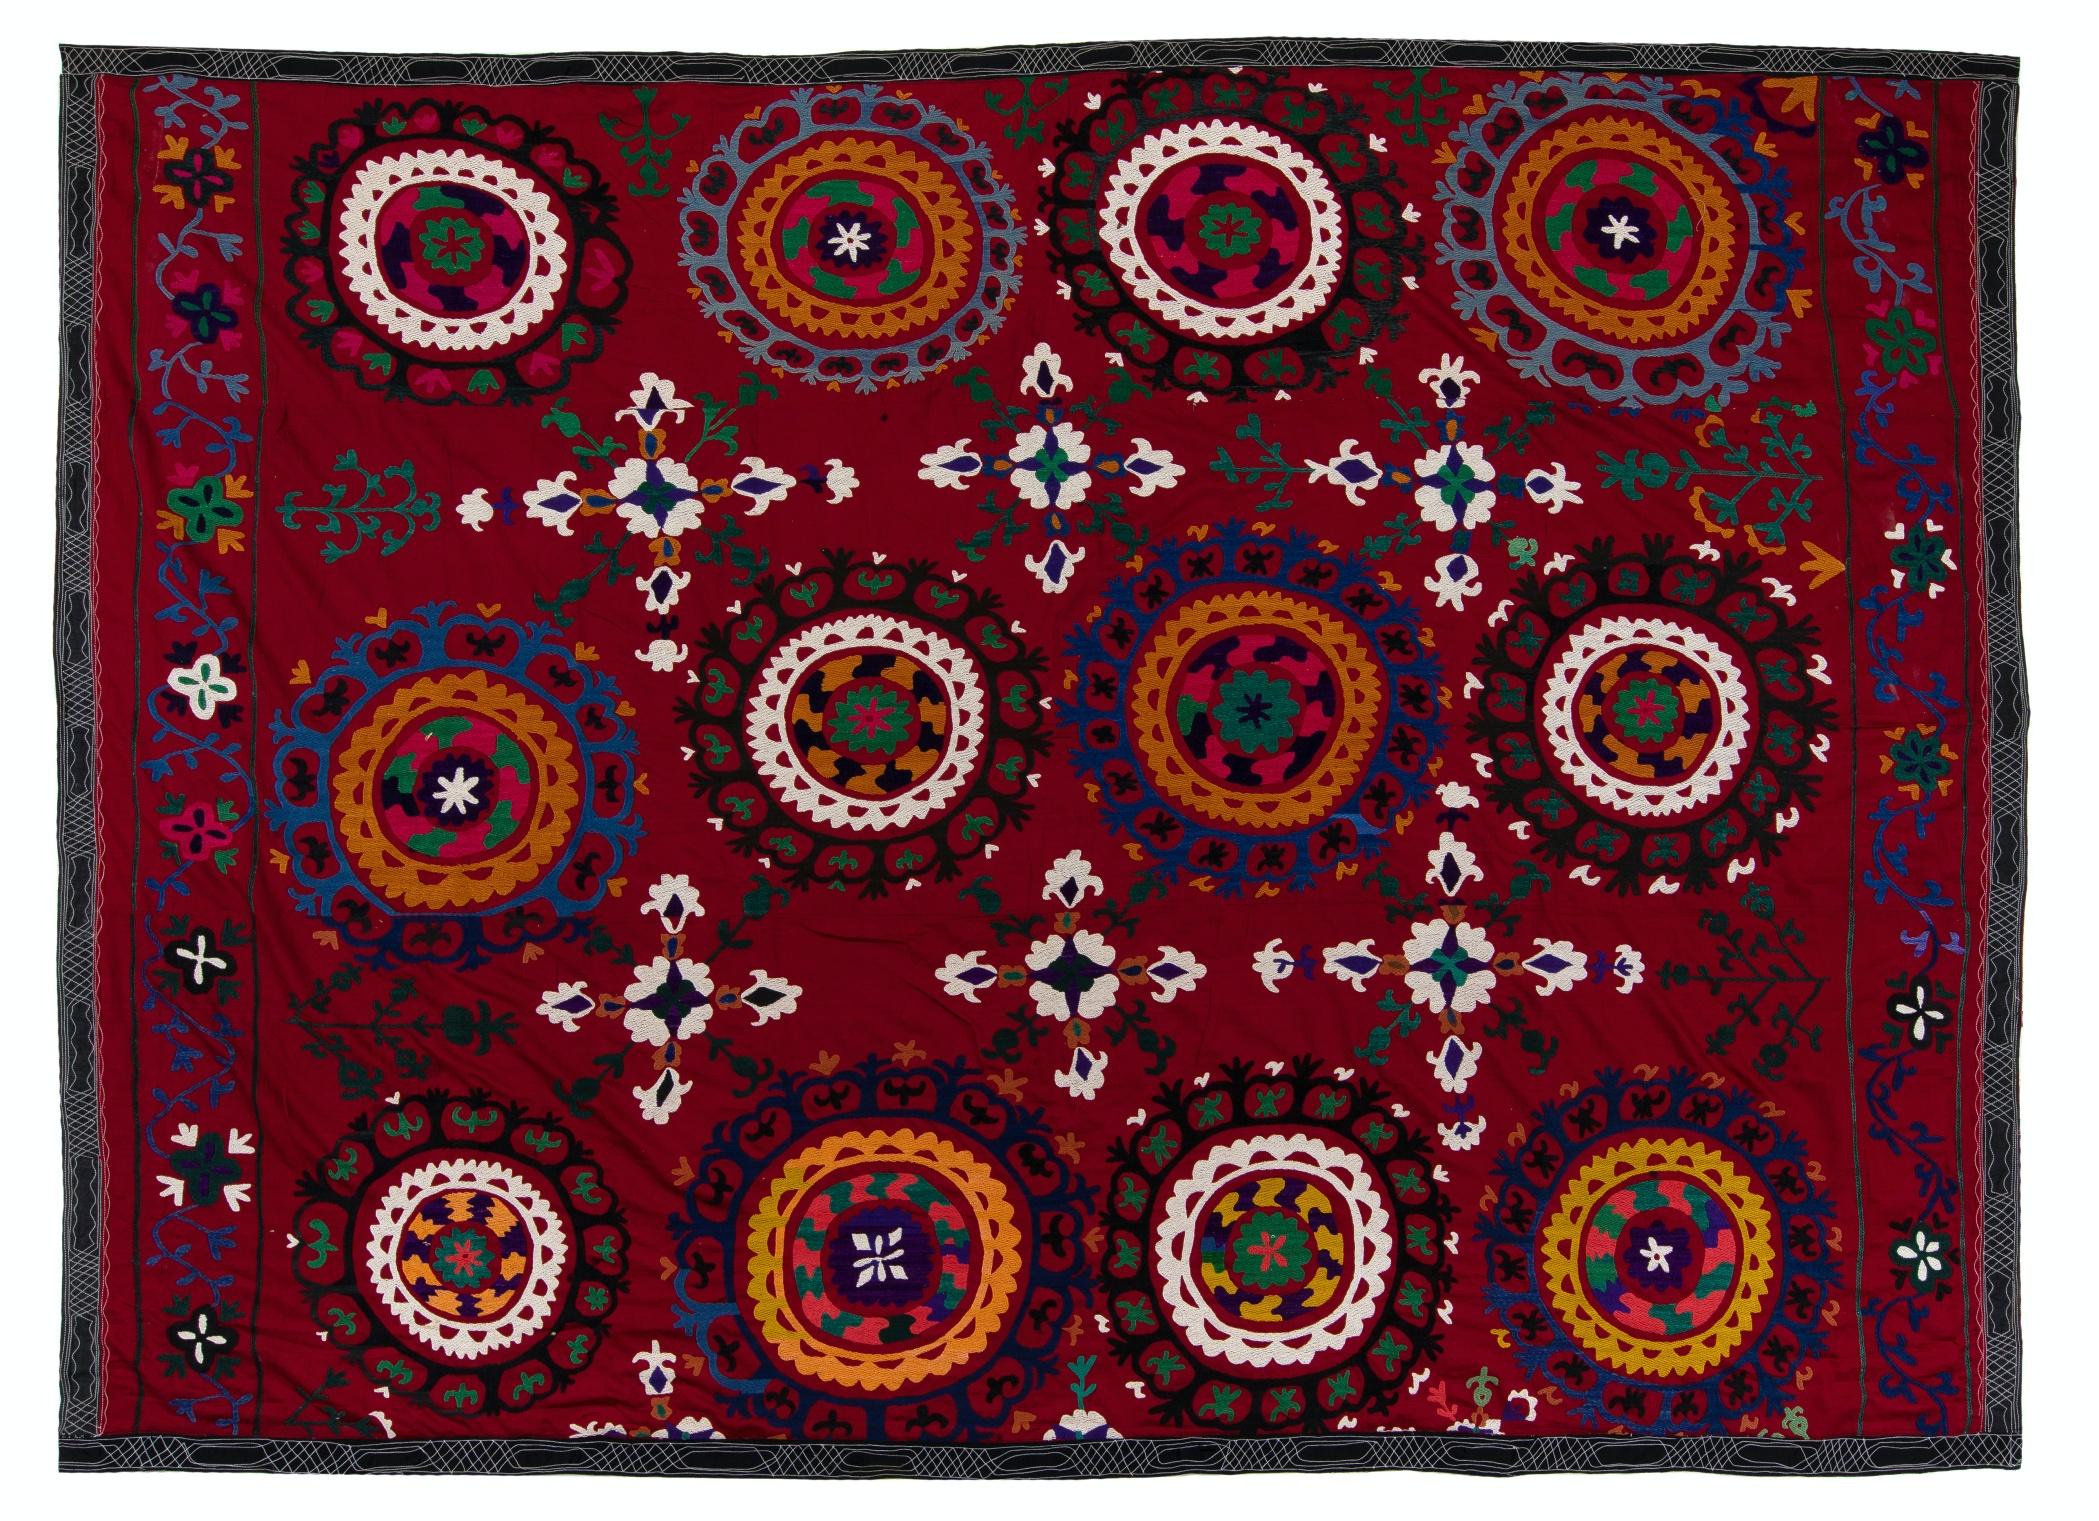 6.4x8.4 Ft Central Asian Suzani Textile, Embroidered Cotton & Silk Wall Hanging For Sale 1